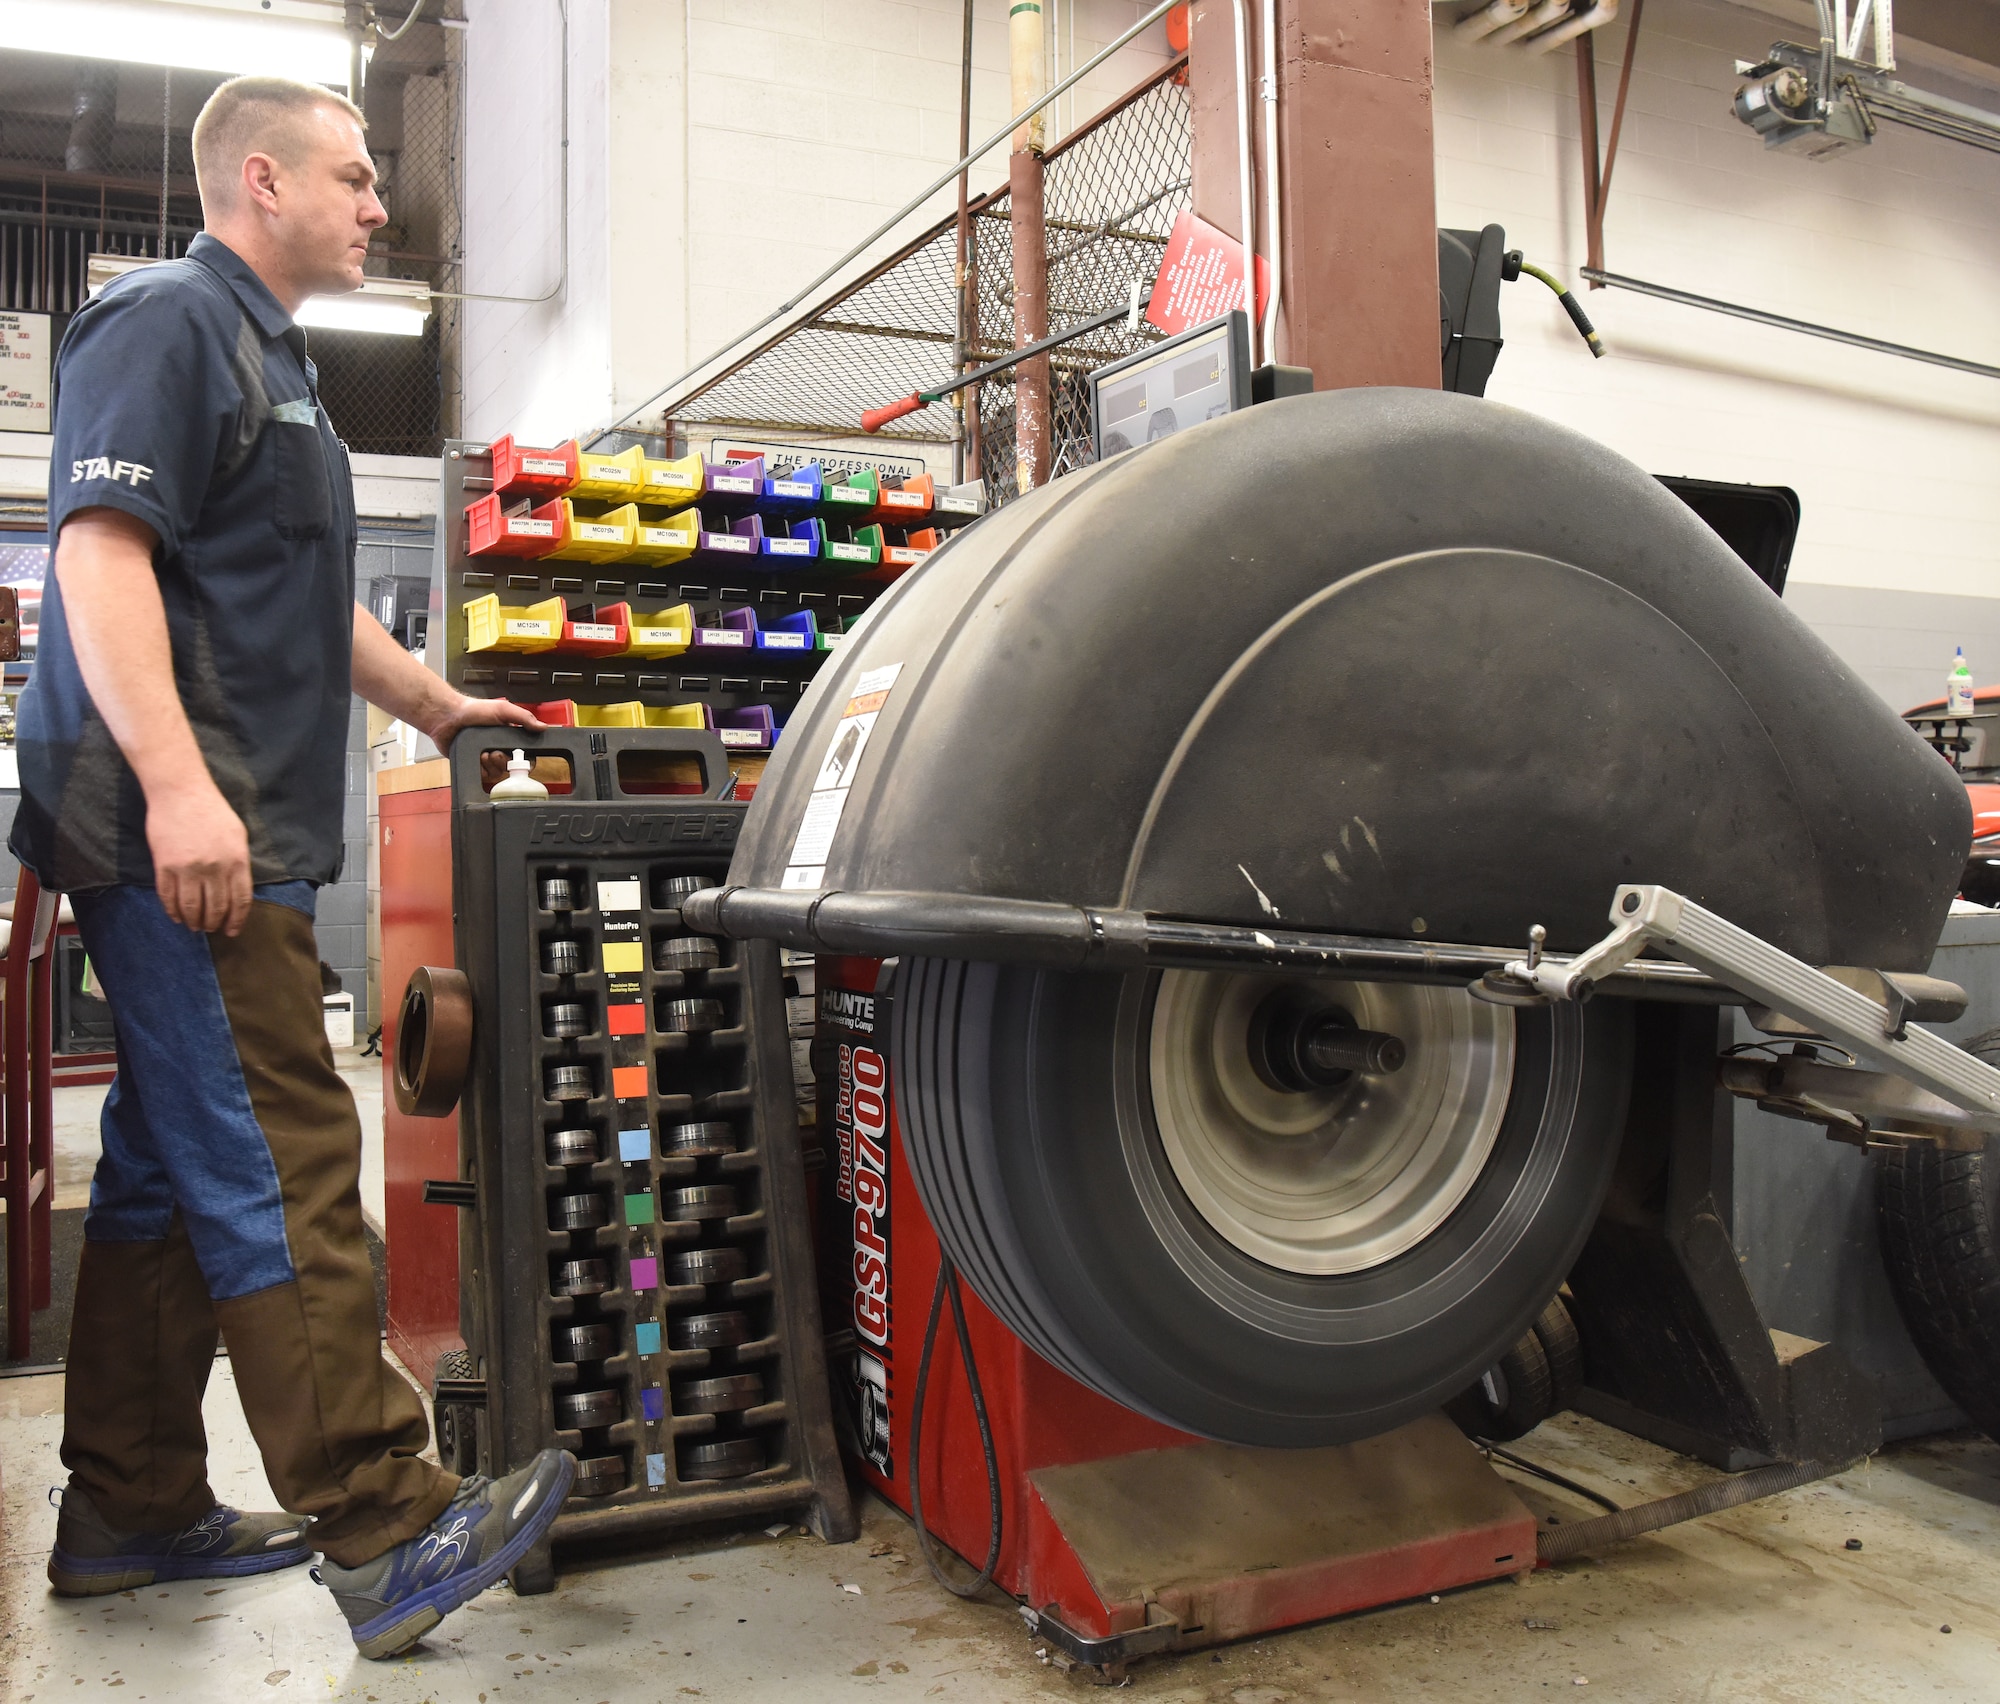 Chadwick Eldridge, a mechanics assistant at the auto hobby shop, performs a tire rotation at Ellsworth Air Force Base, S.D., Aug. 15, 2018. The mechanics at the hobby shop are here to help Airmen and their families with their automotive repair needs and to help car enthusiasts with their projects. (U.S. Air Force Photo by Airman 1st Class Thomas Karol)